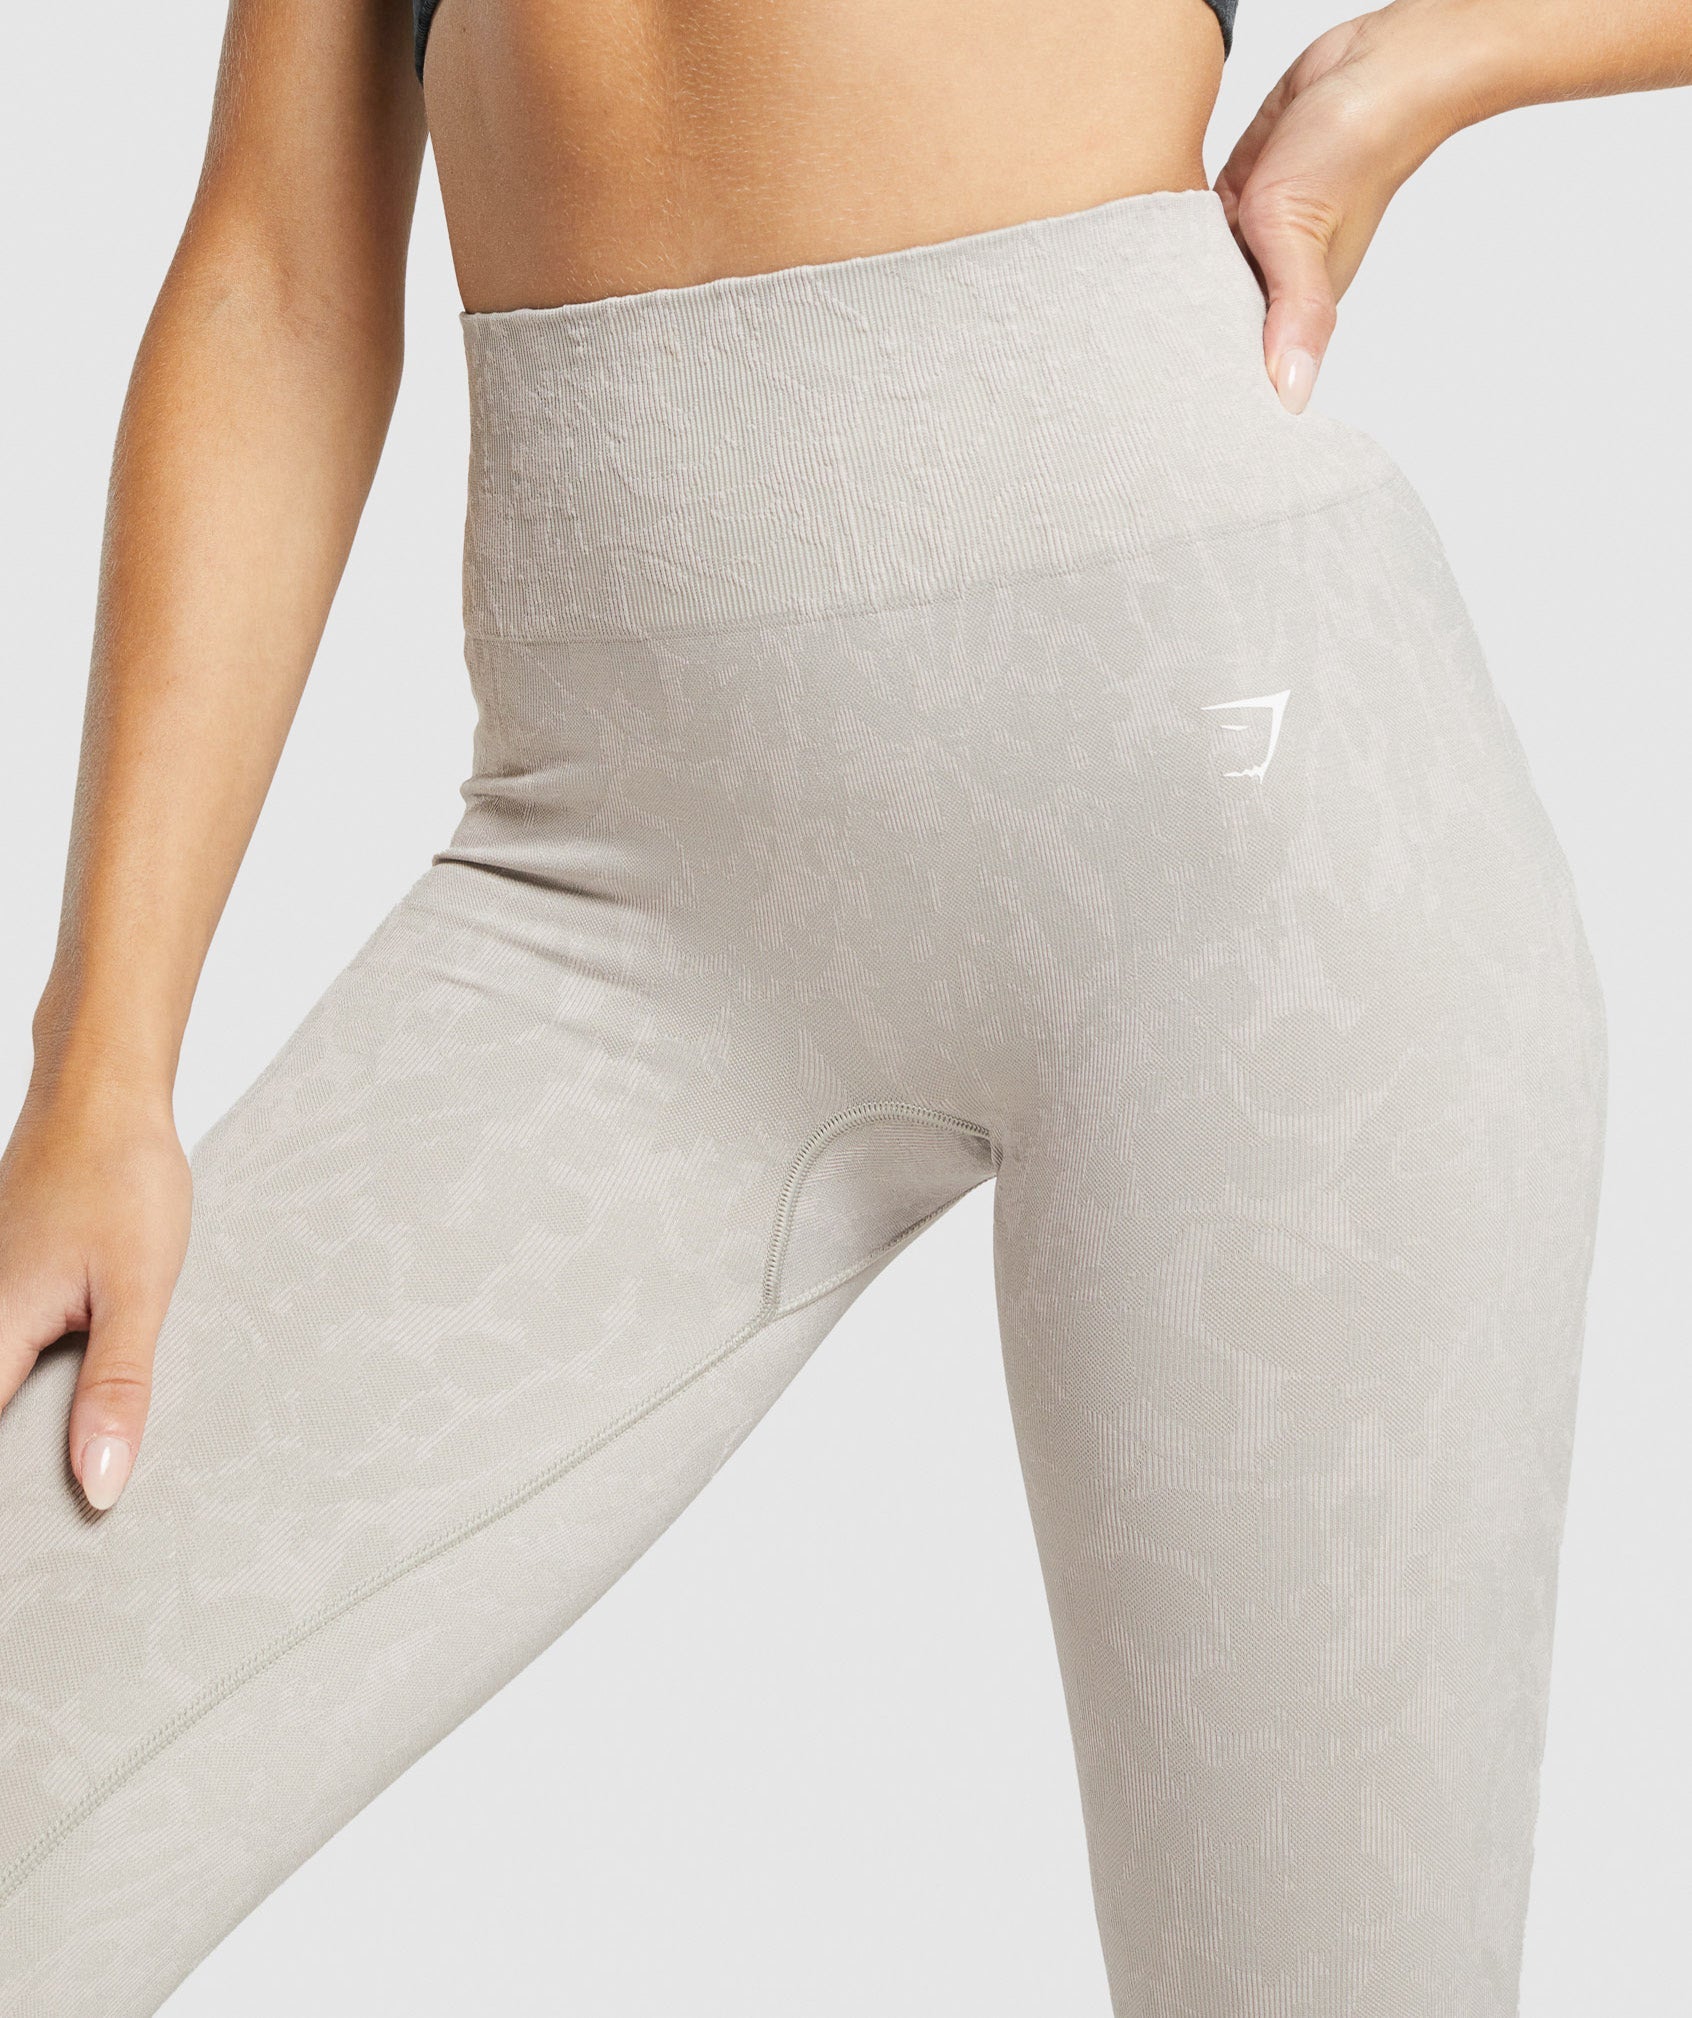 Adapt Animal Seamless Leggings in Butterfly | Grey - view 6